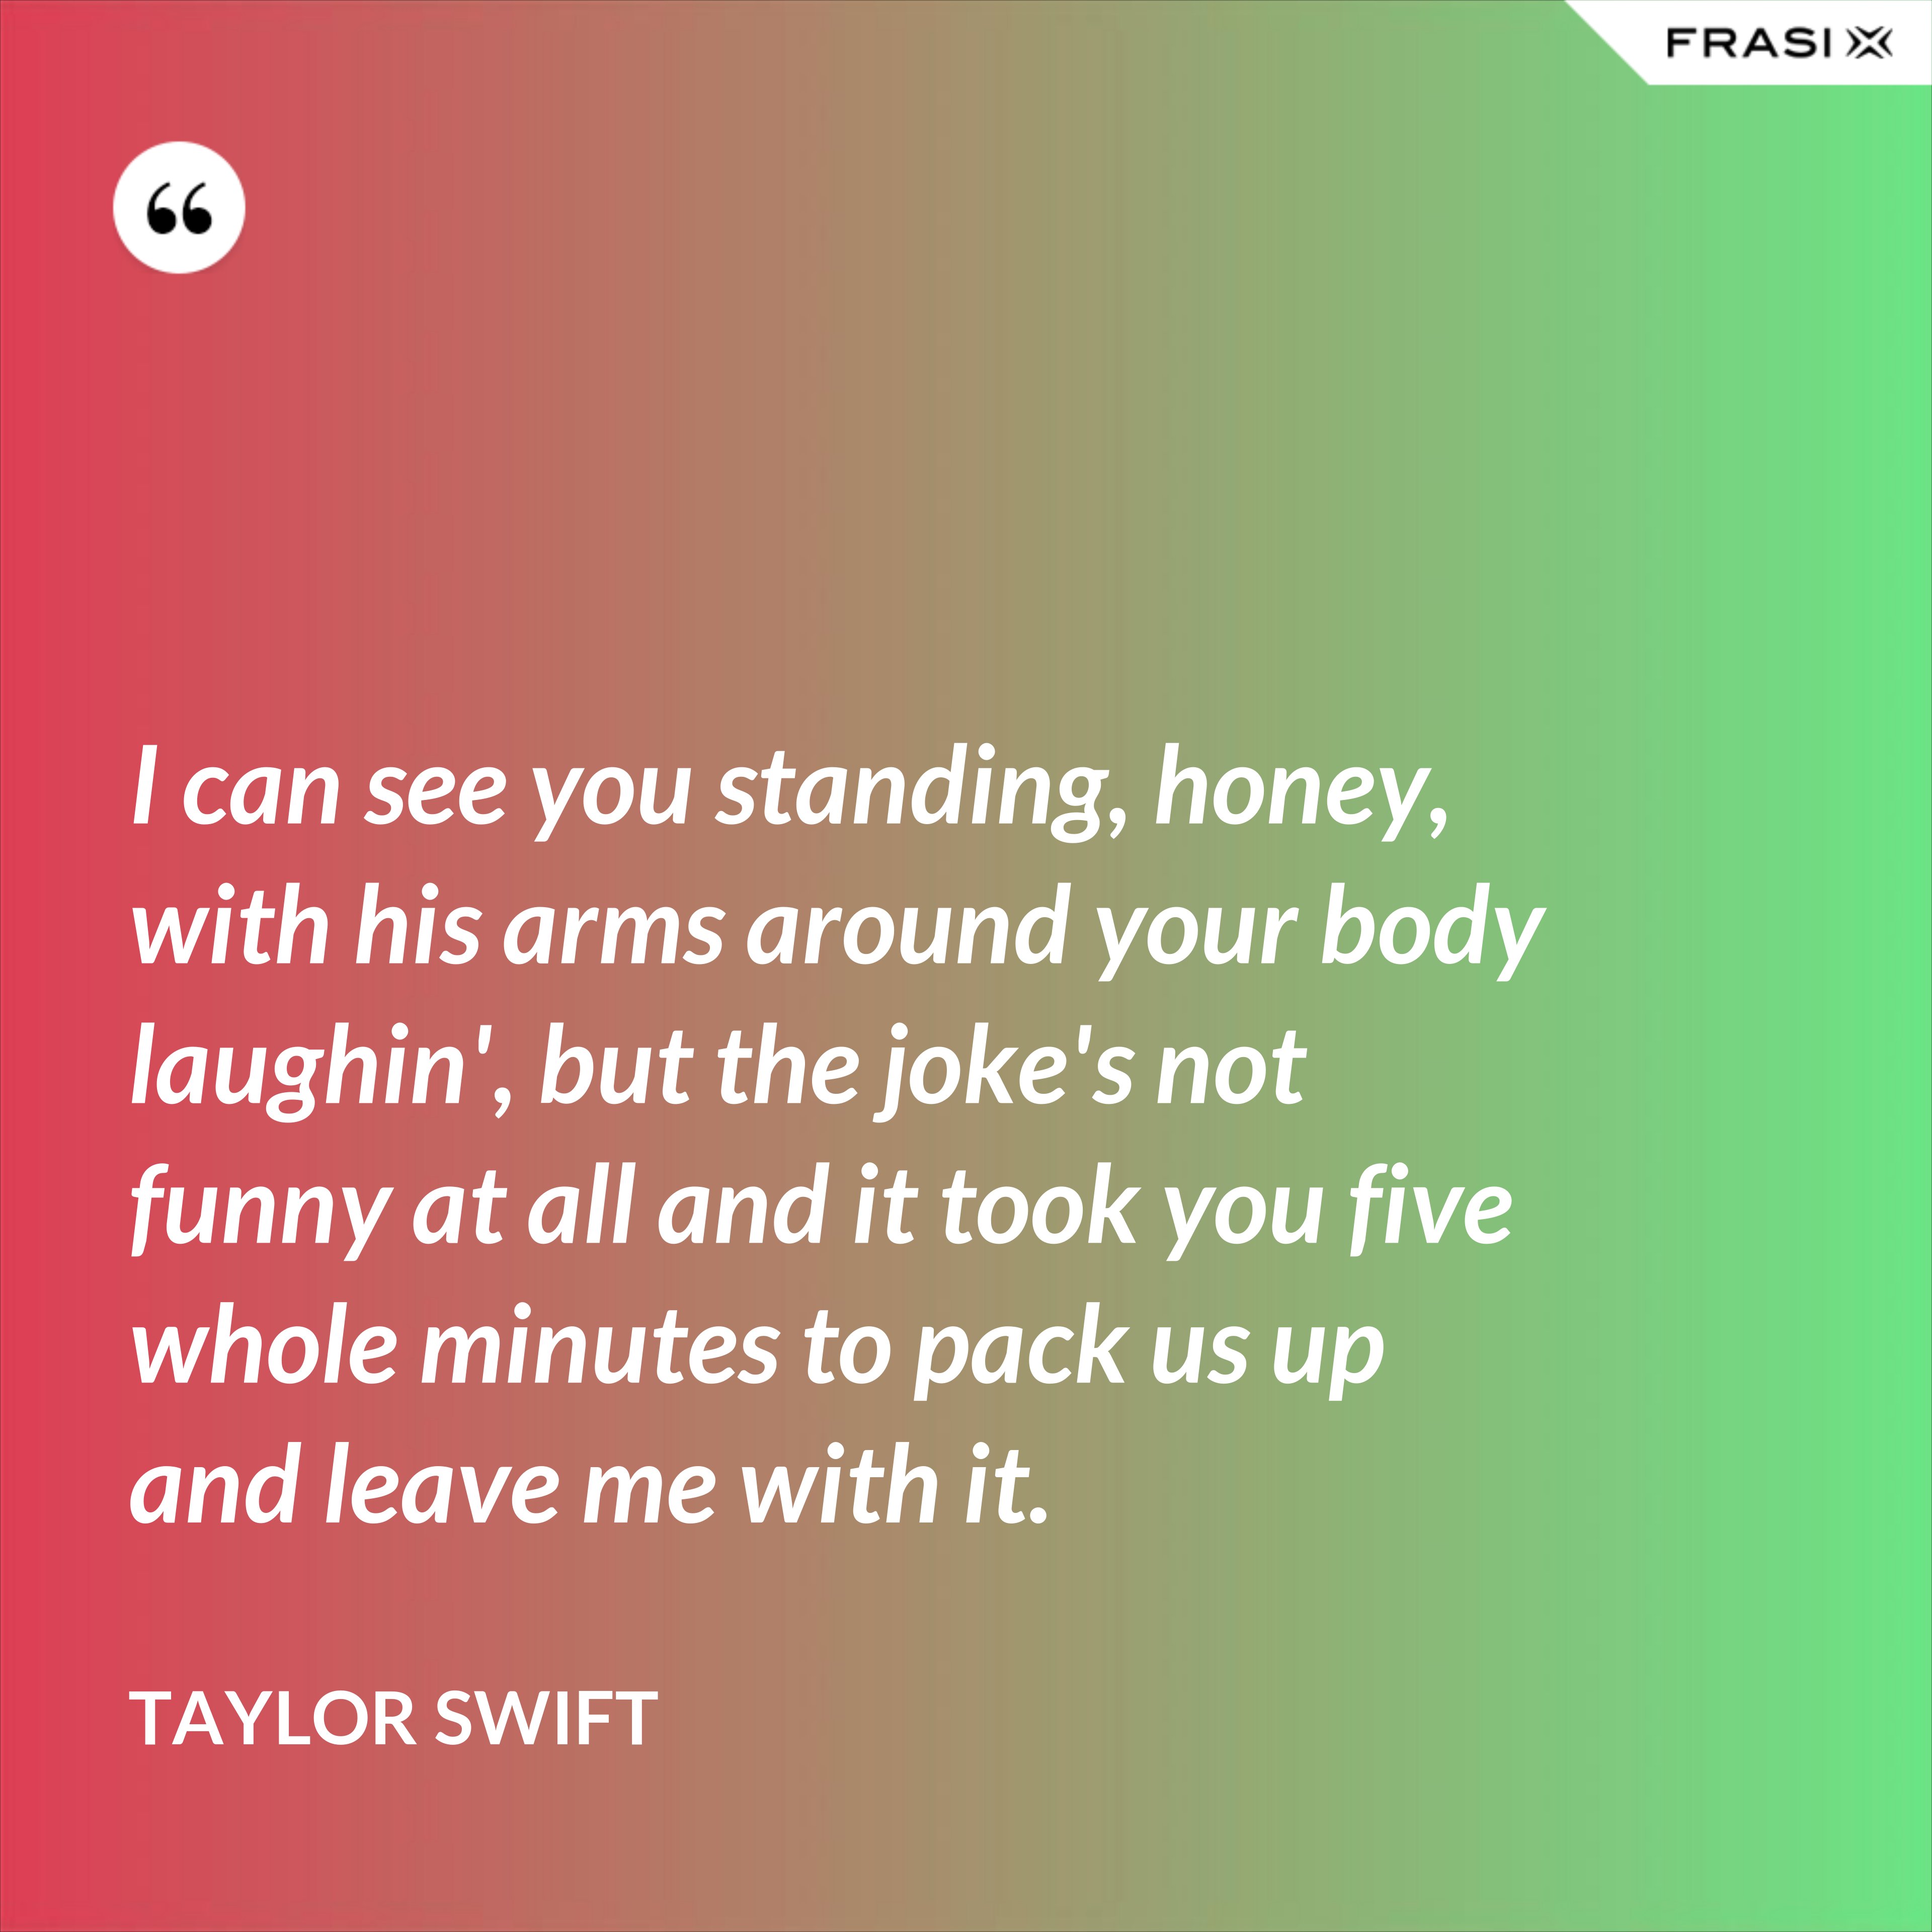 I can see you standing, honey, with his arms around your body laughin', but the joke's not funny at all and it took you five whole minutes to pack us up and leave me with it. - Taylor Swift